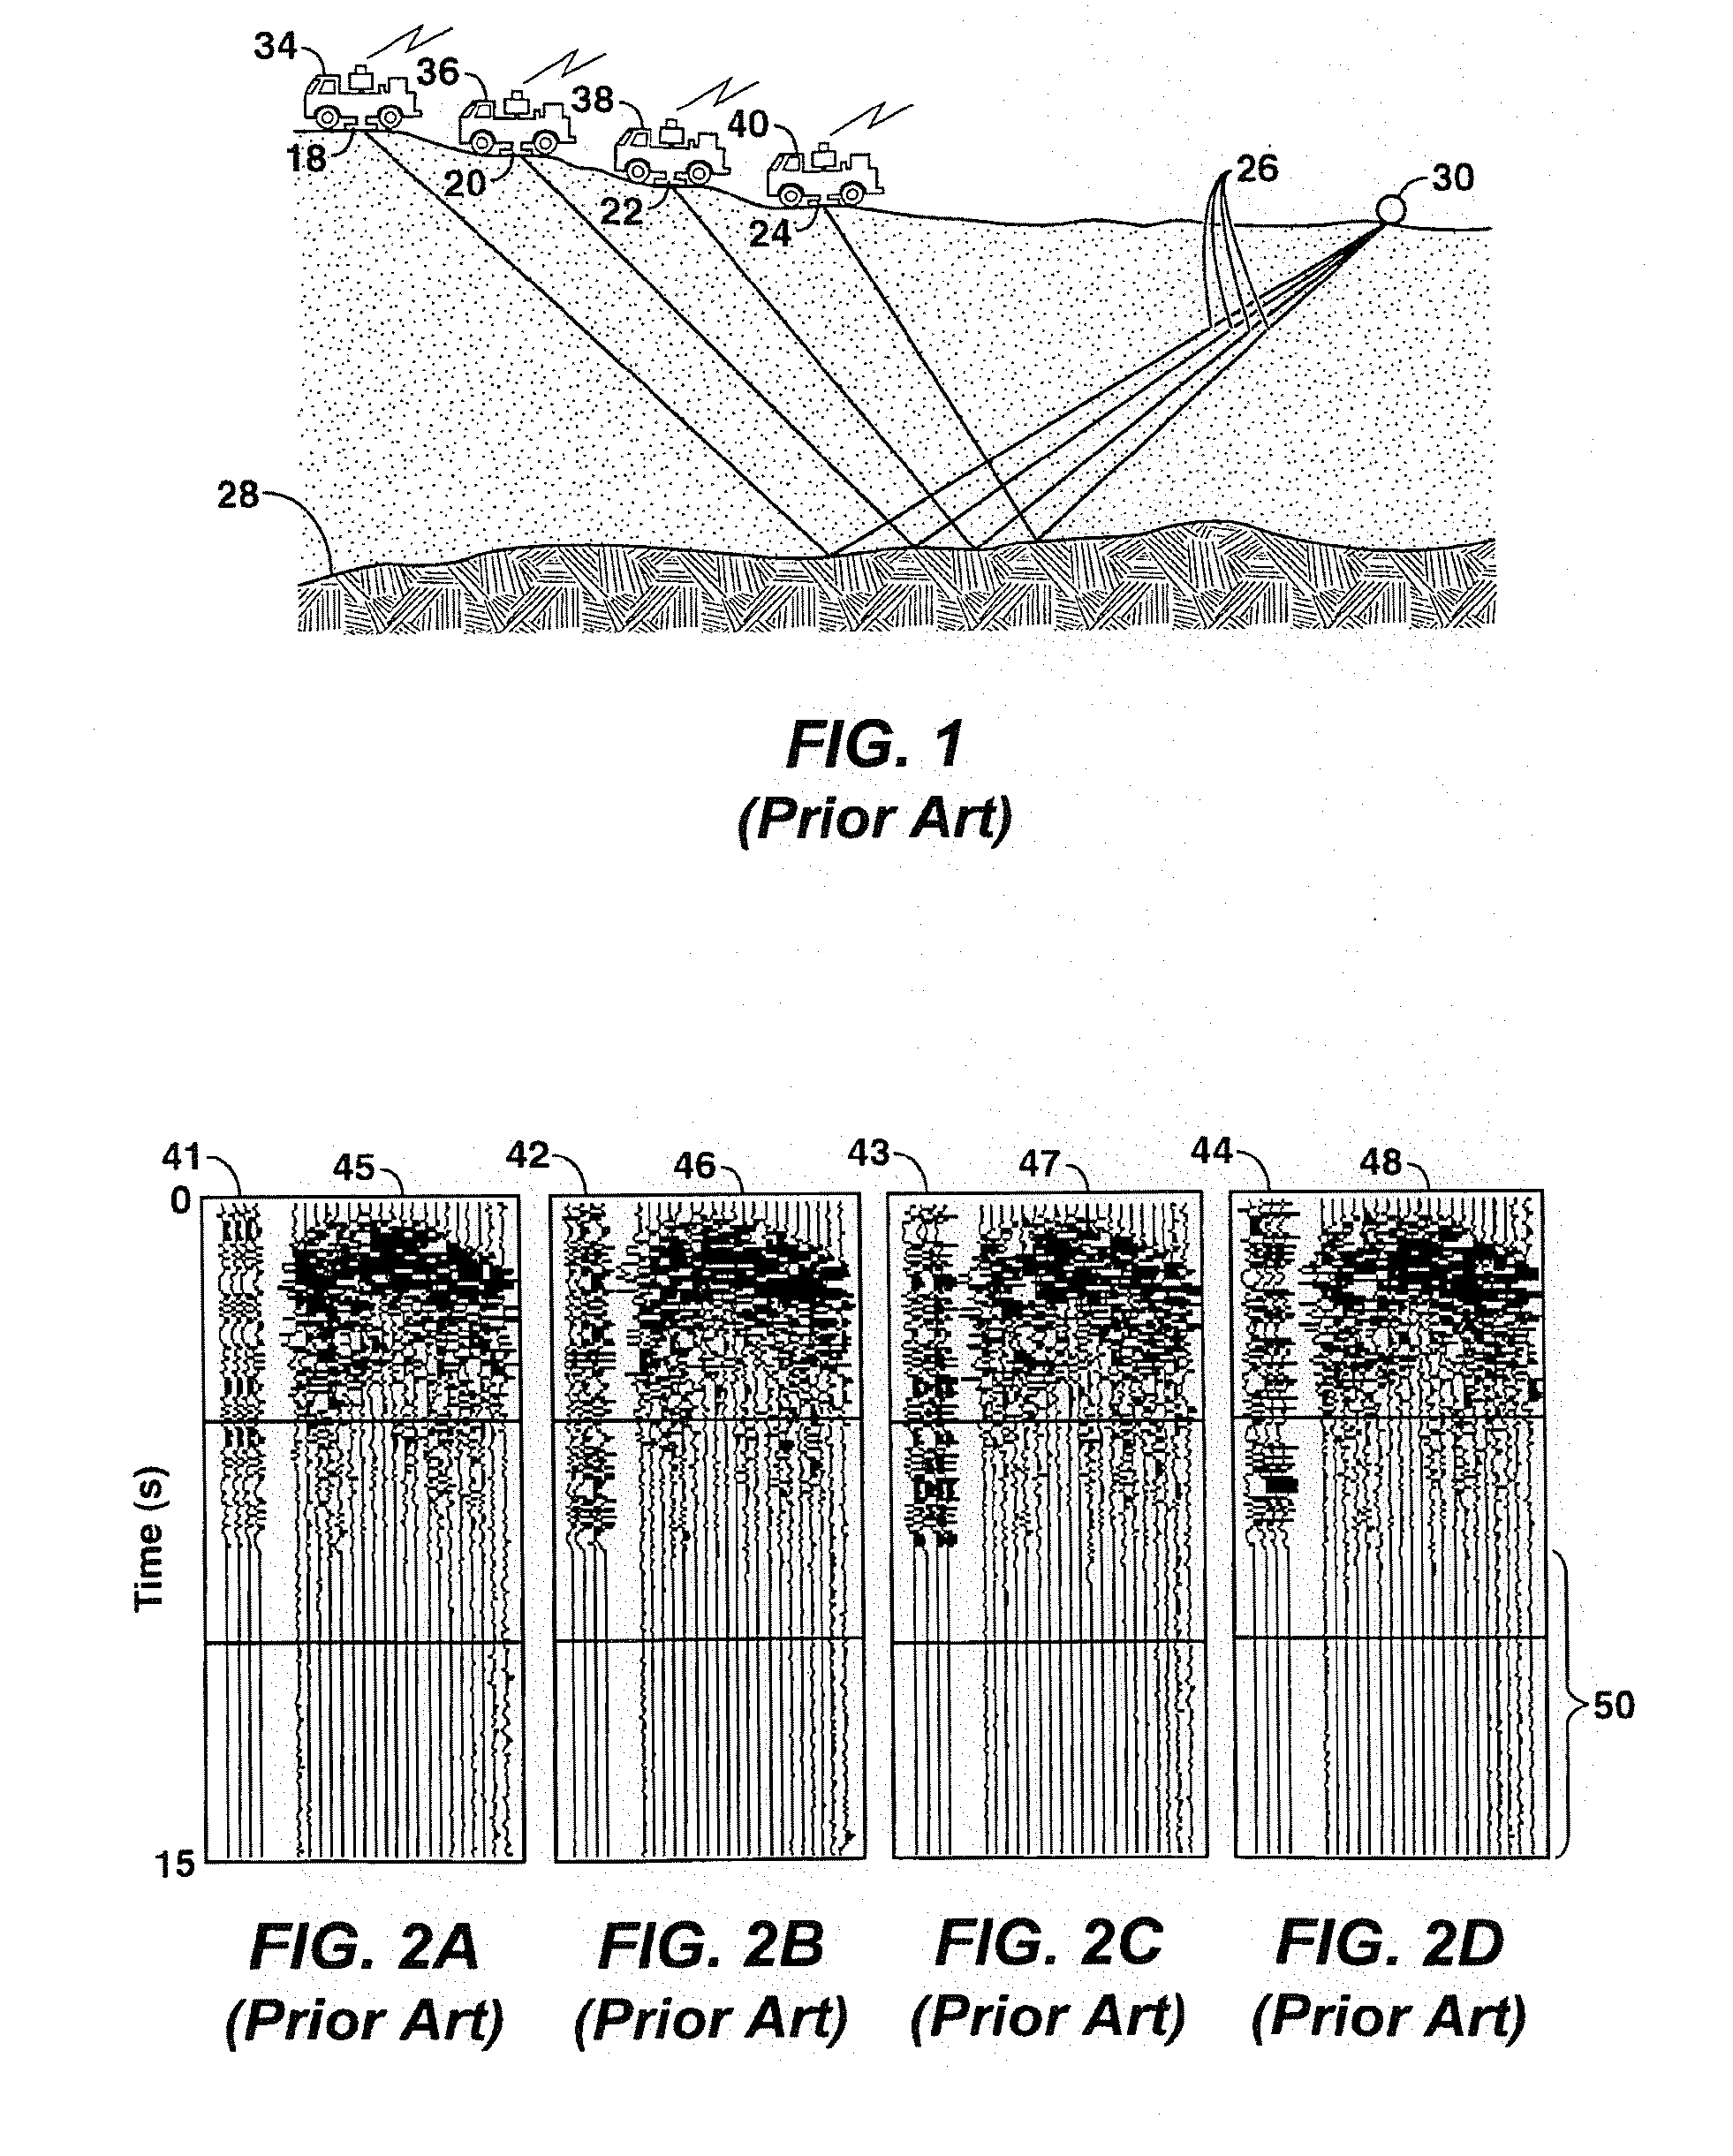 Separation and Noise Removal for Multiple Vibratory Source Seismic Data